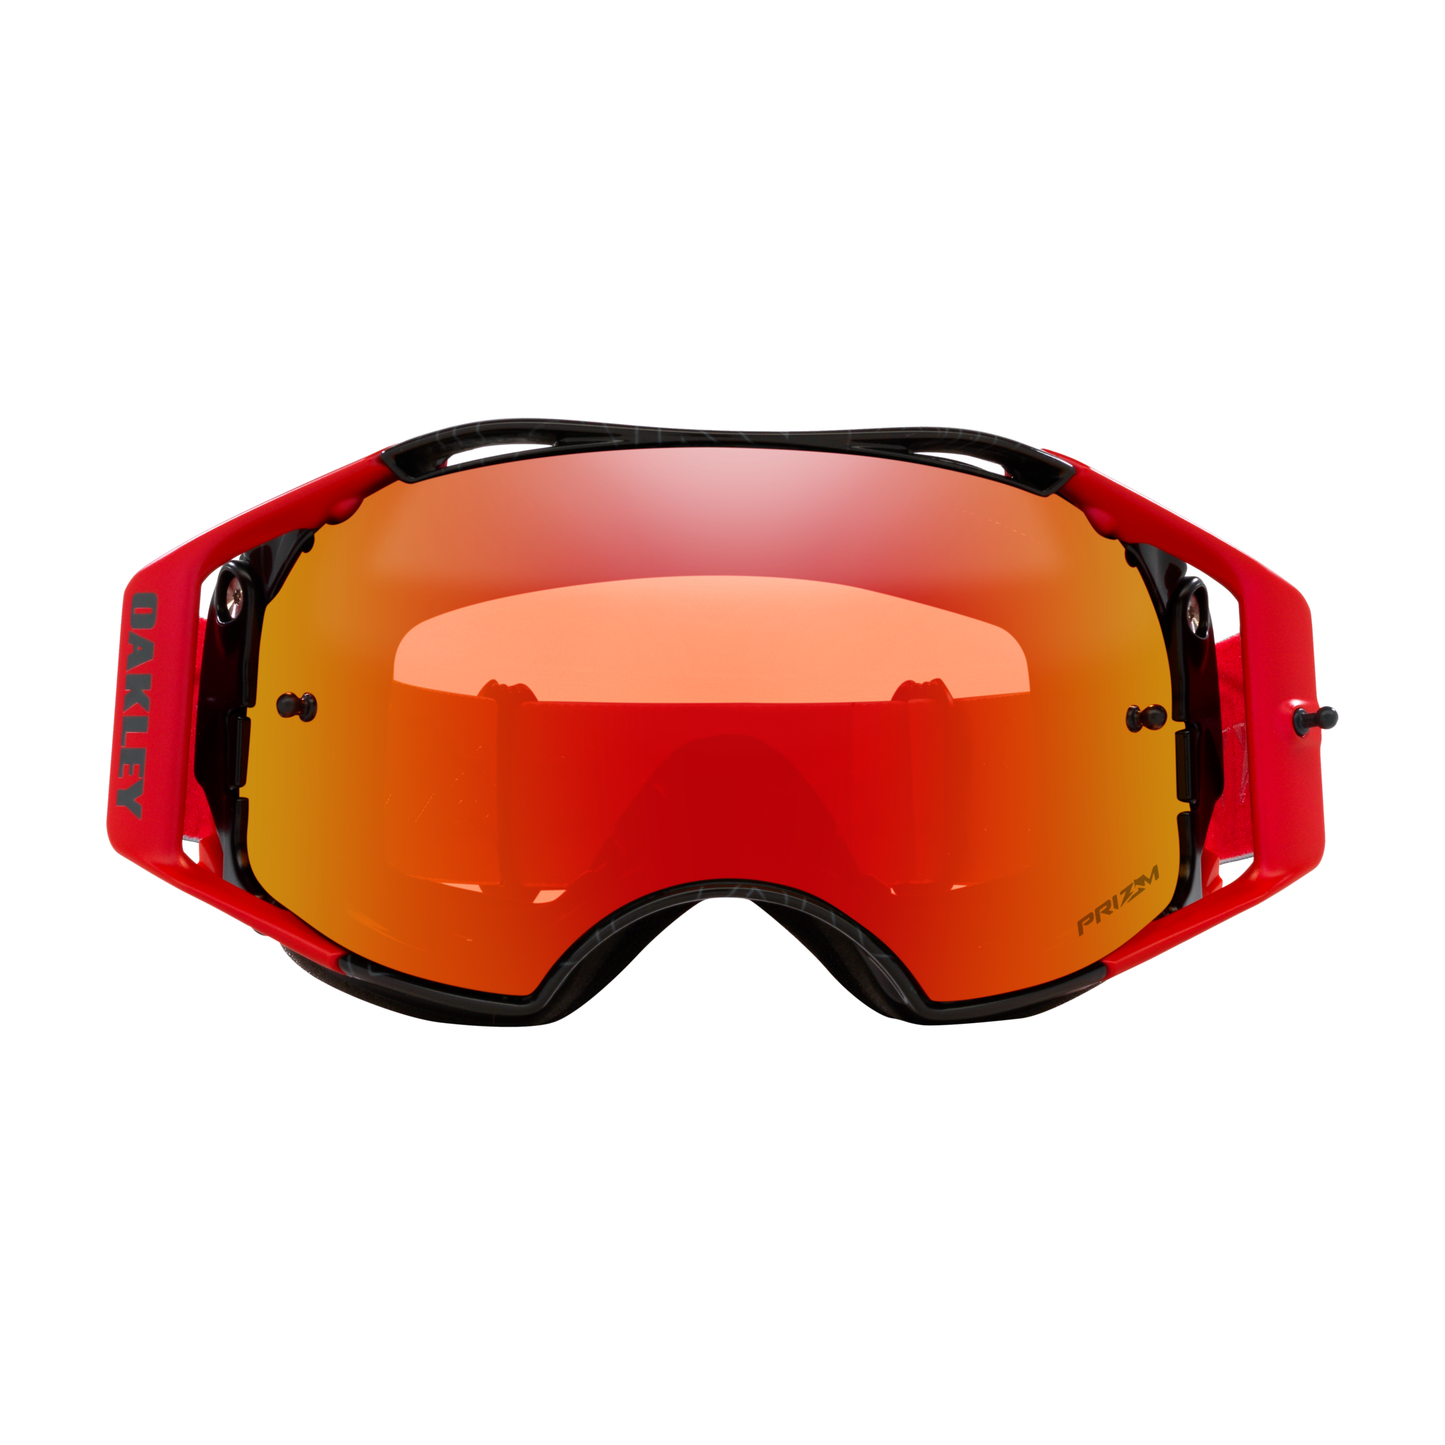 Oakley Airbrake MTB Goggles - One Size Fits Most - TLD Trippy Black - Prizm MX Torch Lens